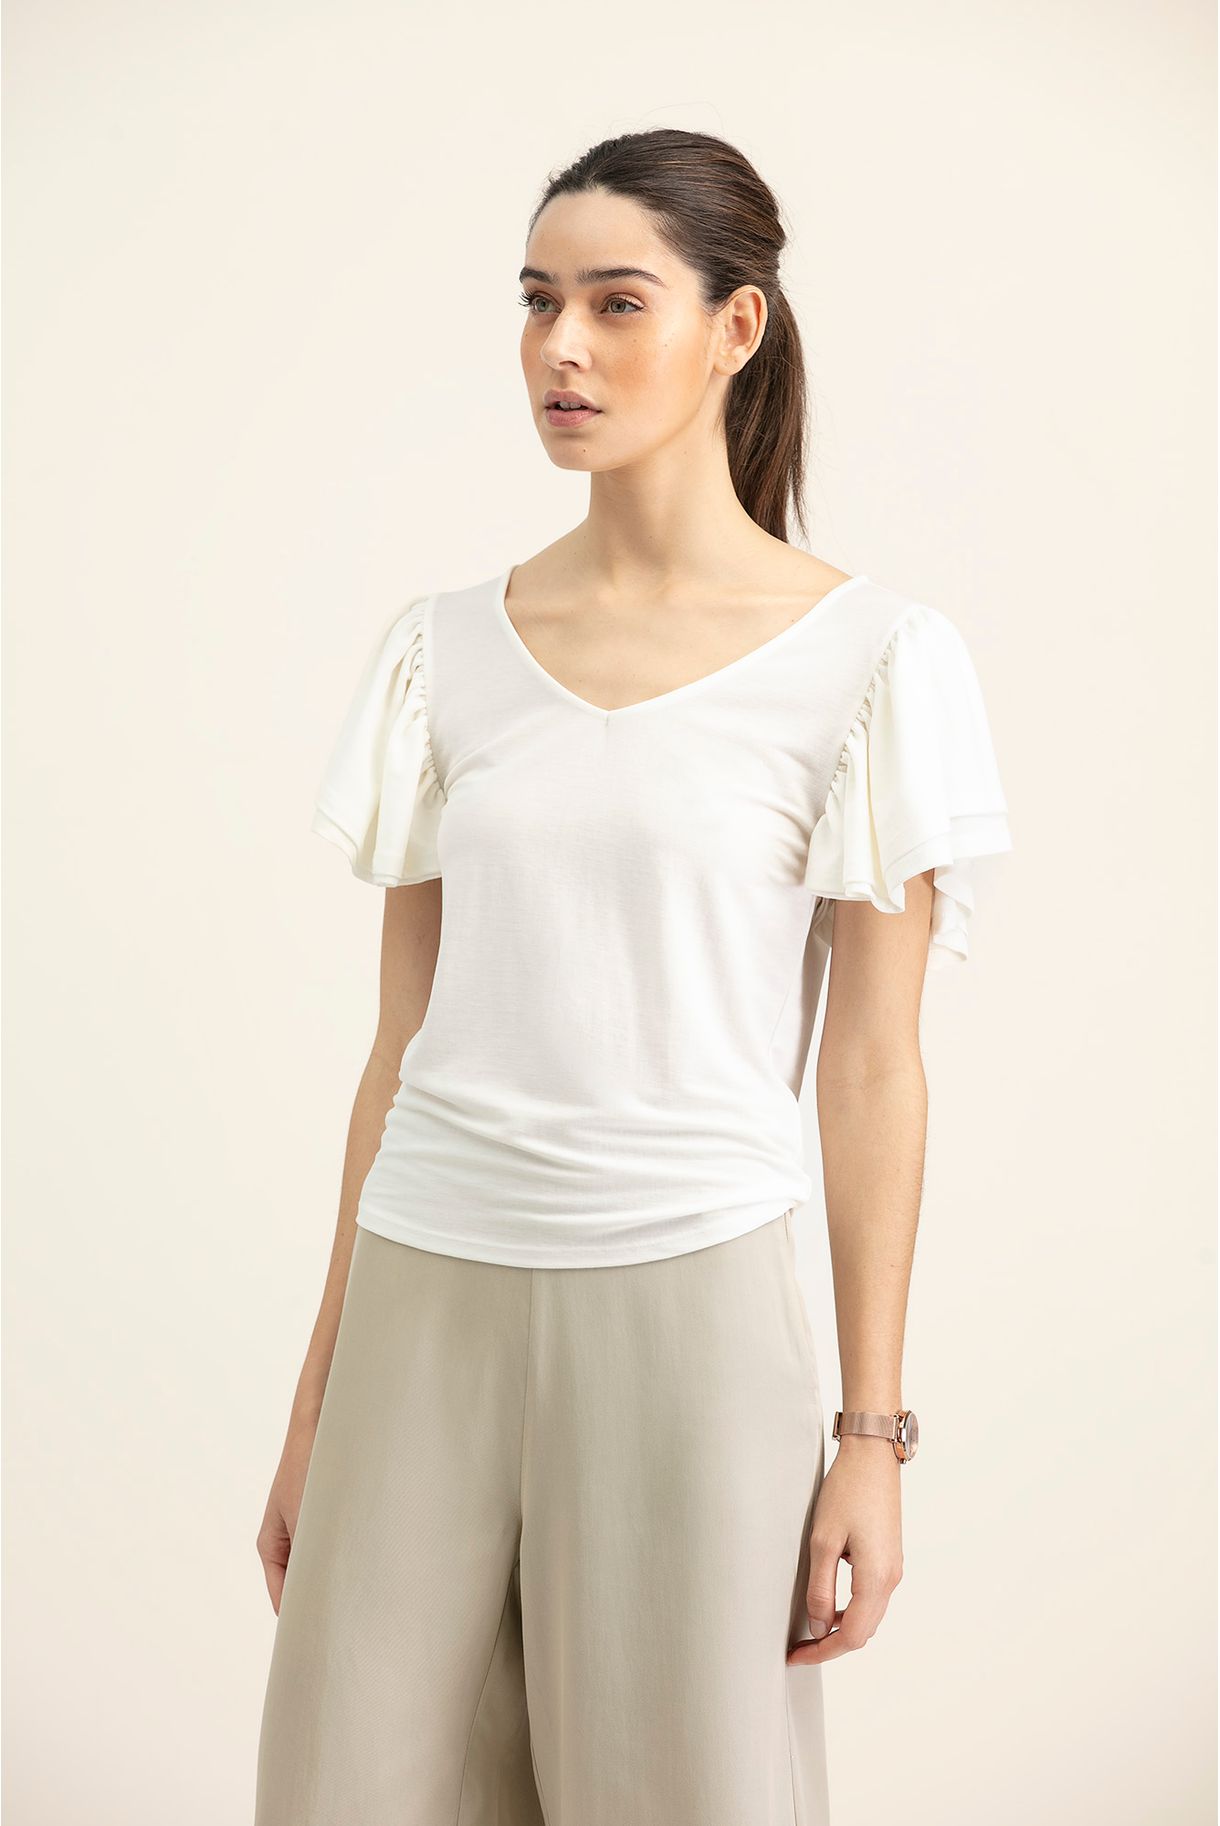 TOP WITH Ruffles on the sleeves